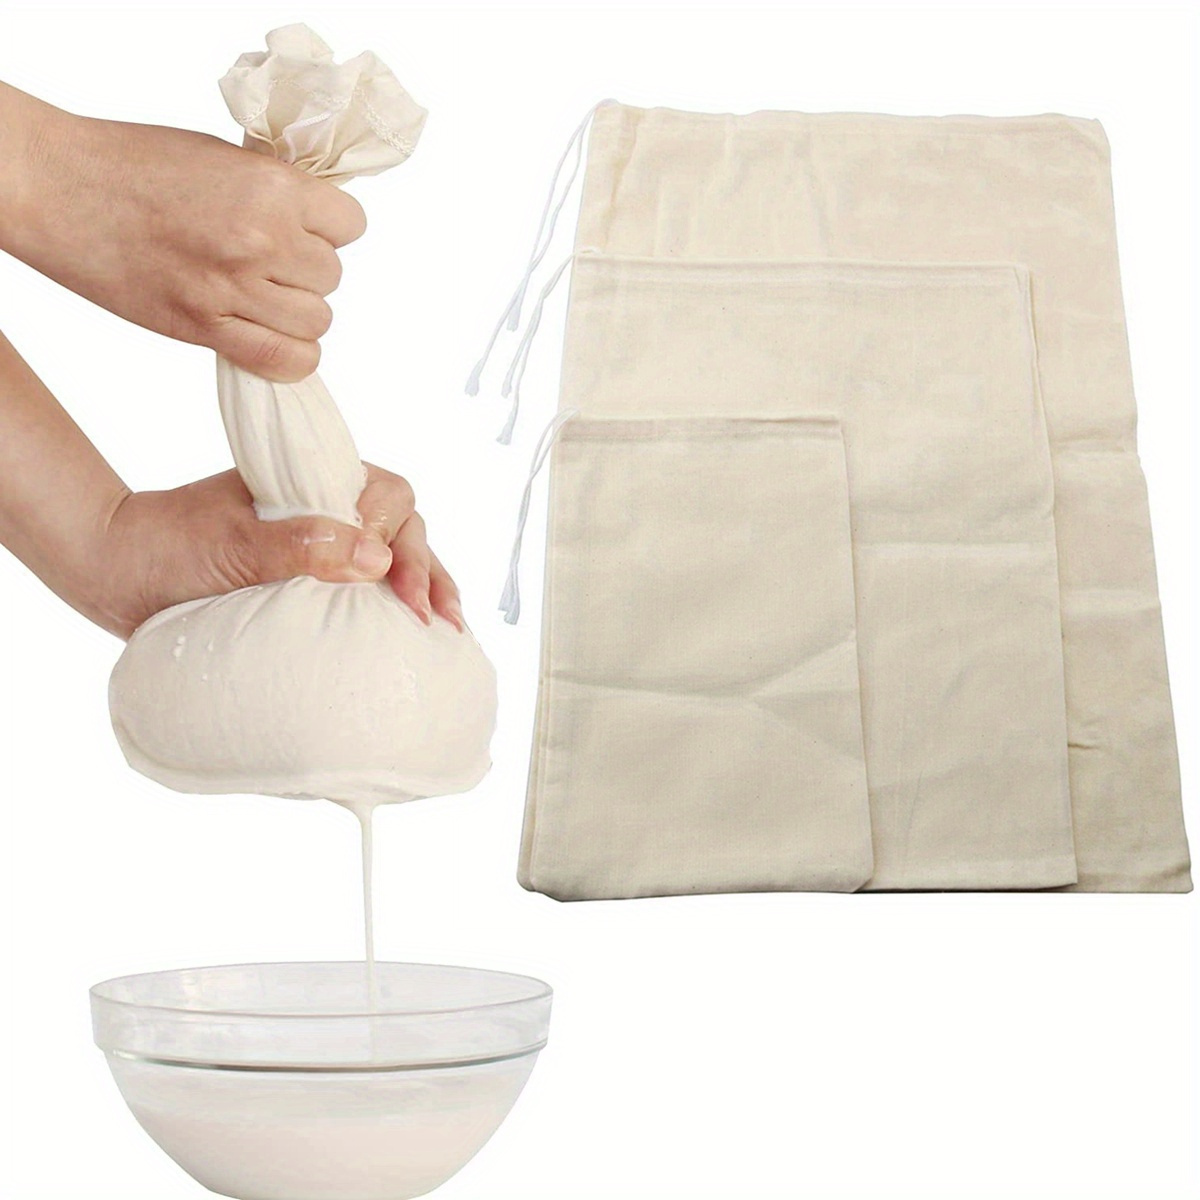 

3pcs Reusable Cheesecloth Bags For Restaurant, For Straining Coffee Filter Strainers, Mesh Pouch, Squeezable Natural Straining Nut Milk Filter Bag Kitchen Stuff Clearance Kitchen Accessories